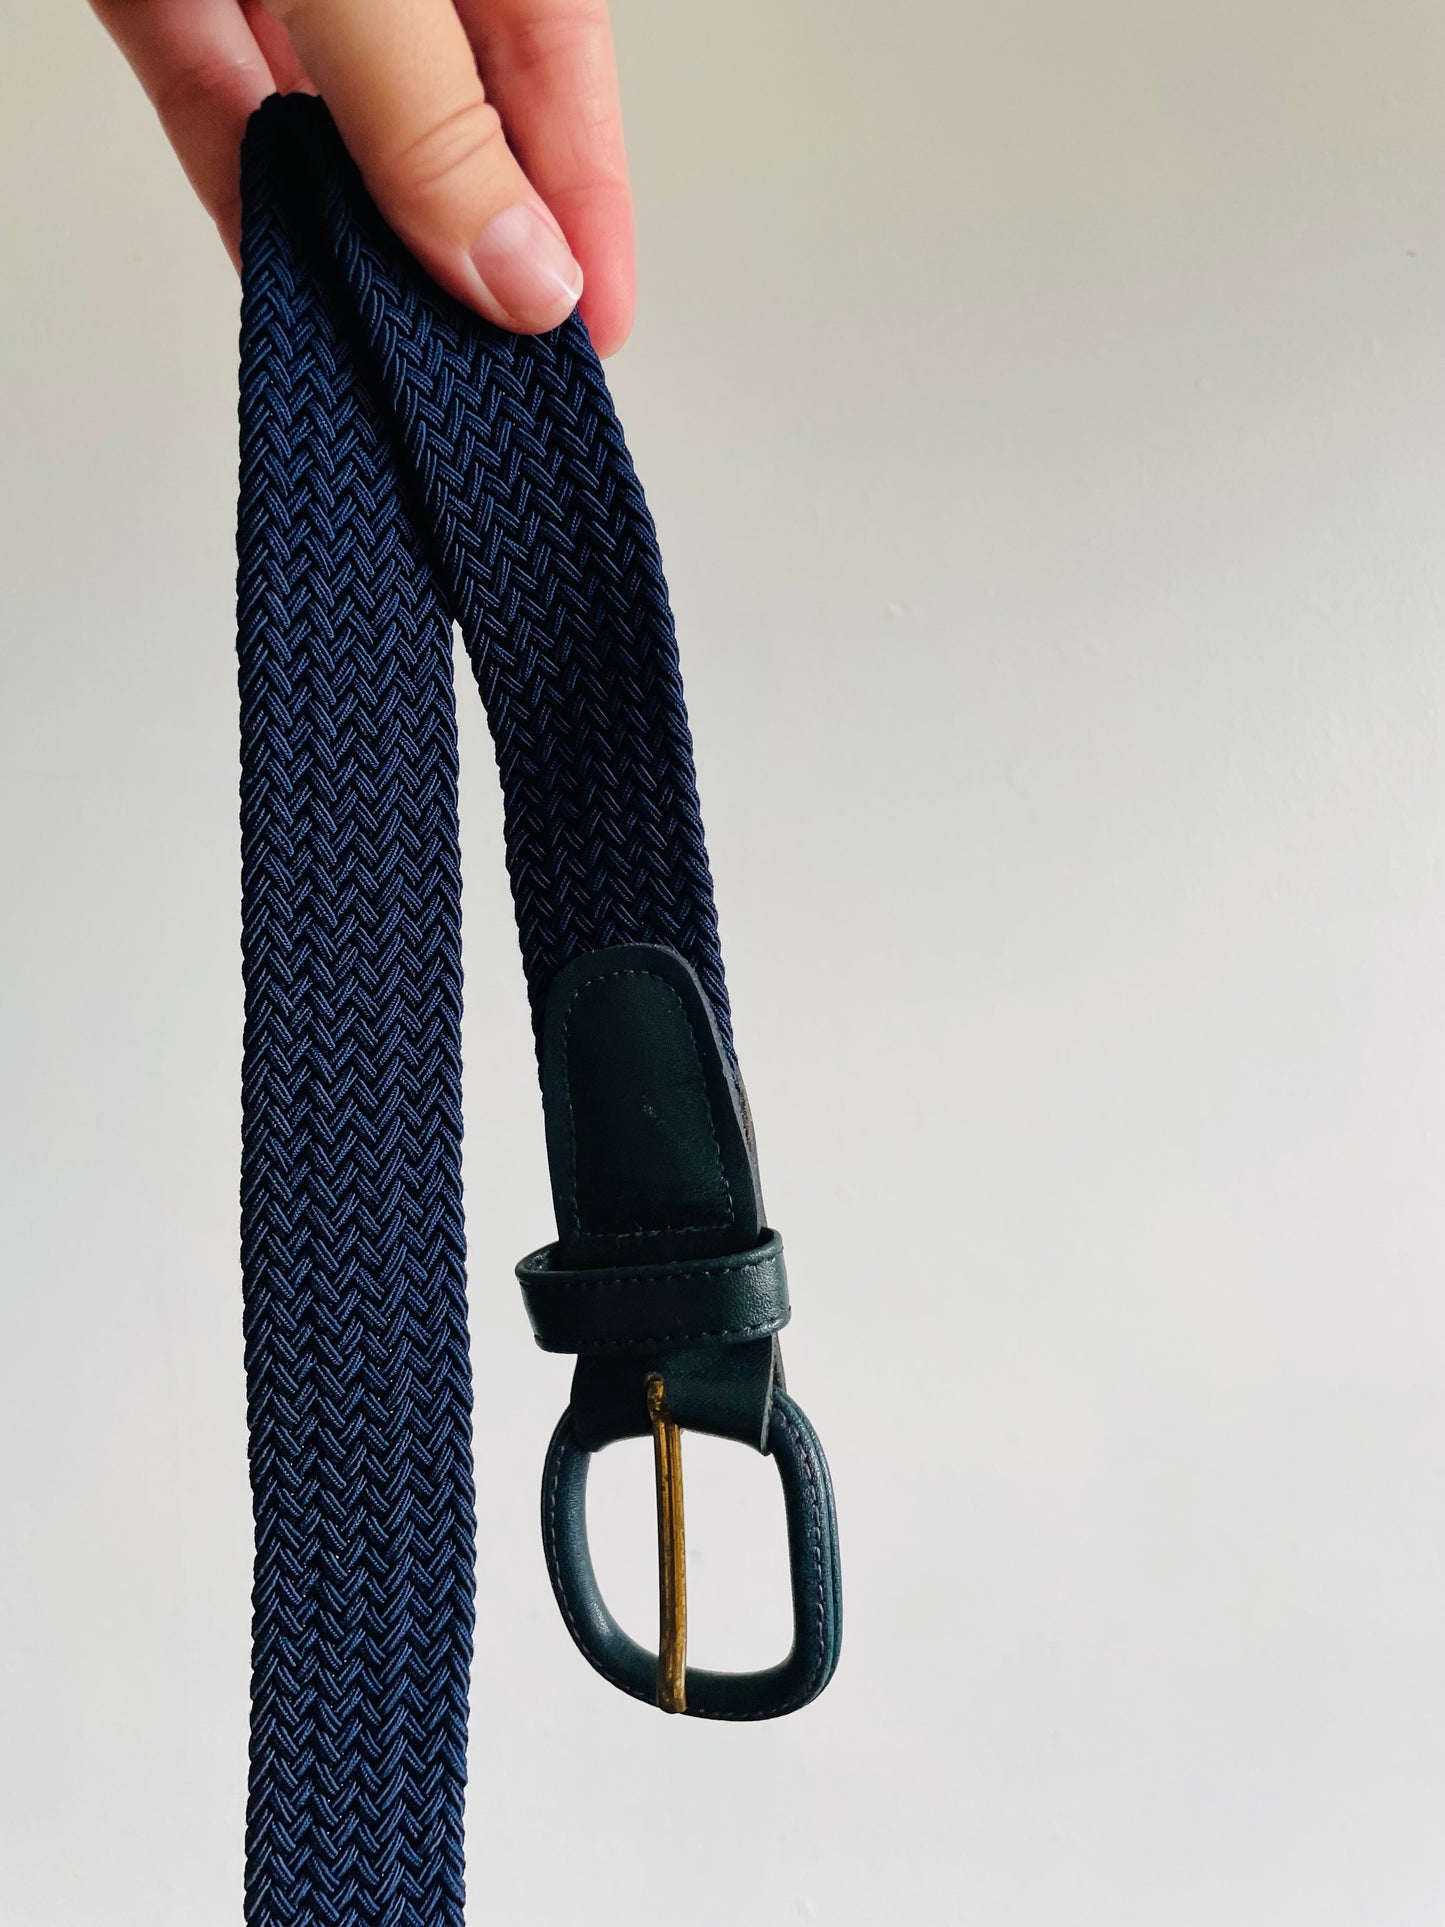 Navy Blue Braided Rope Belt with Leather Buckle - Very Stretchy Rope!